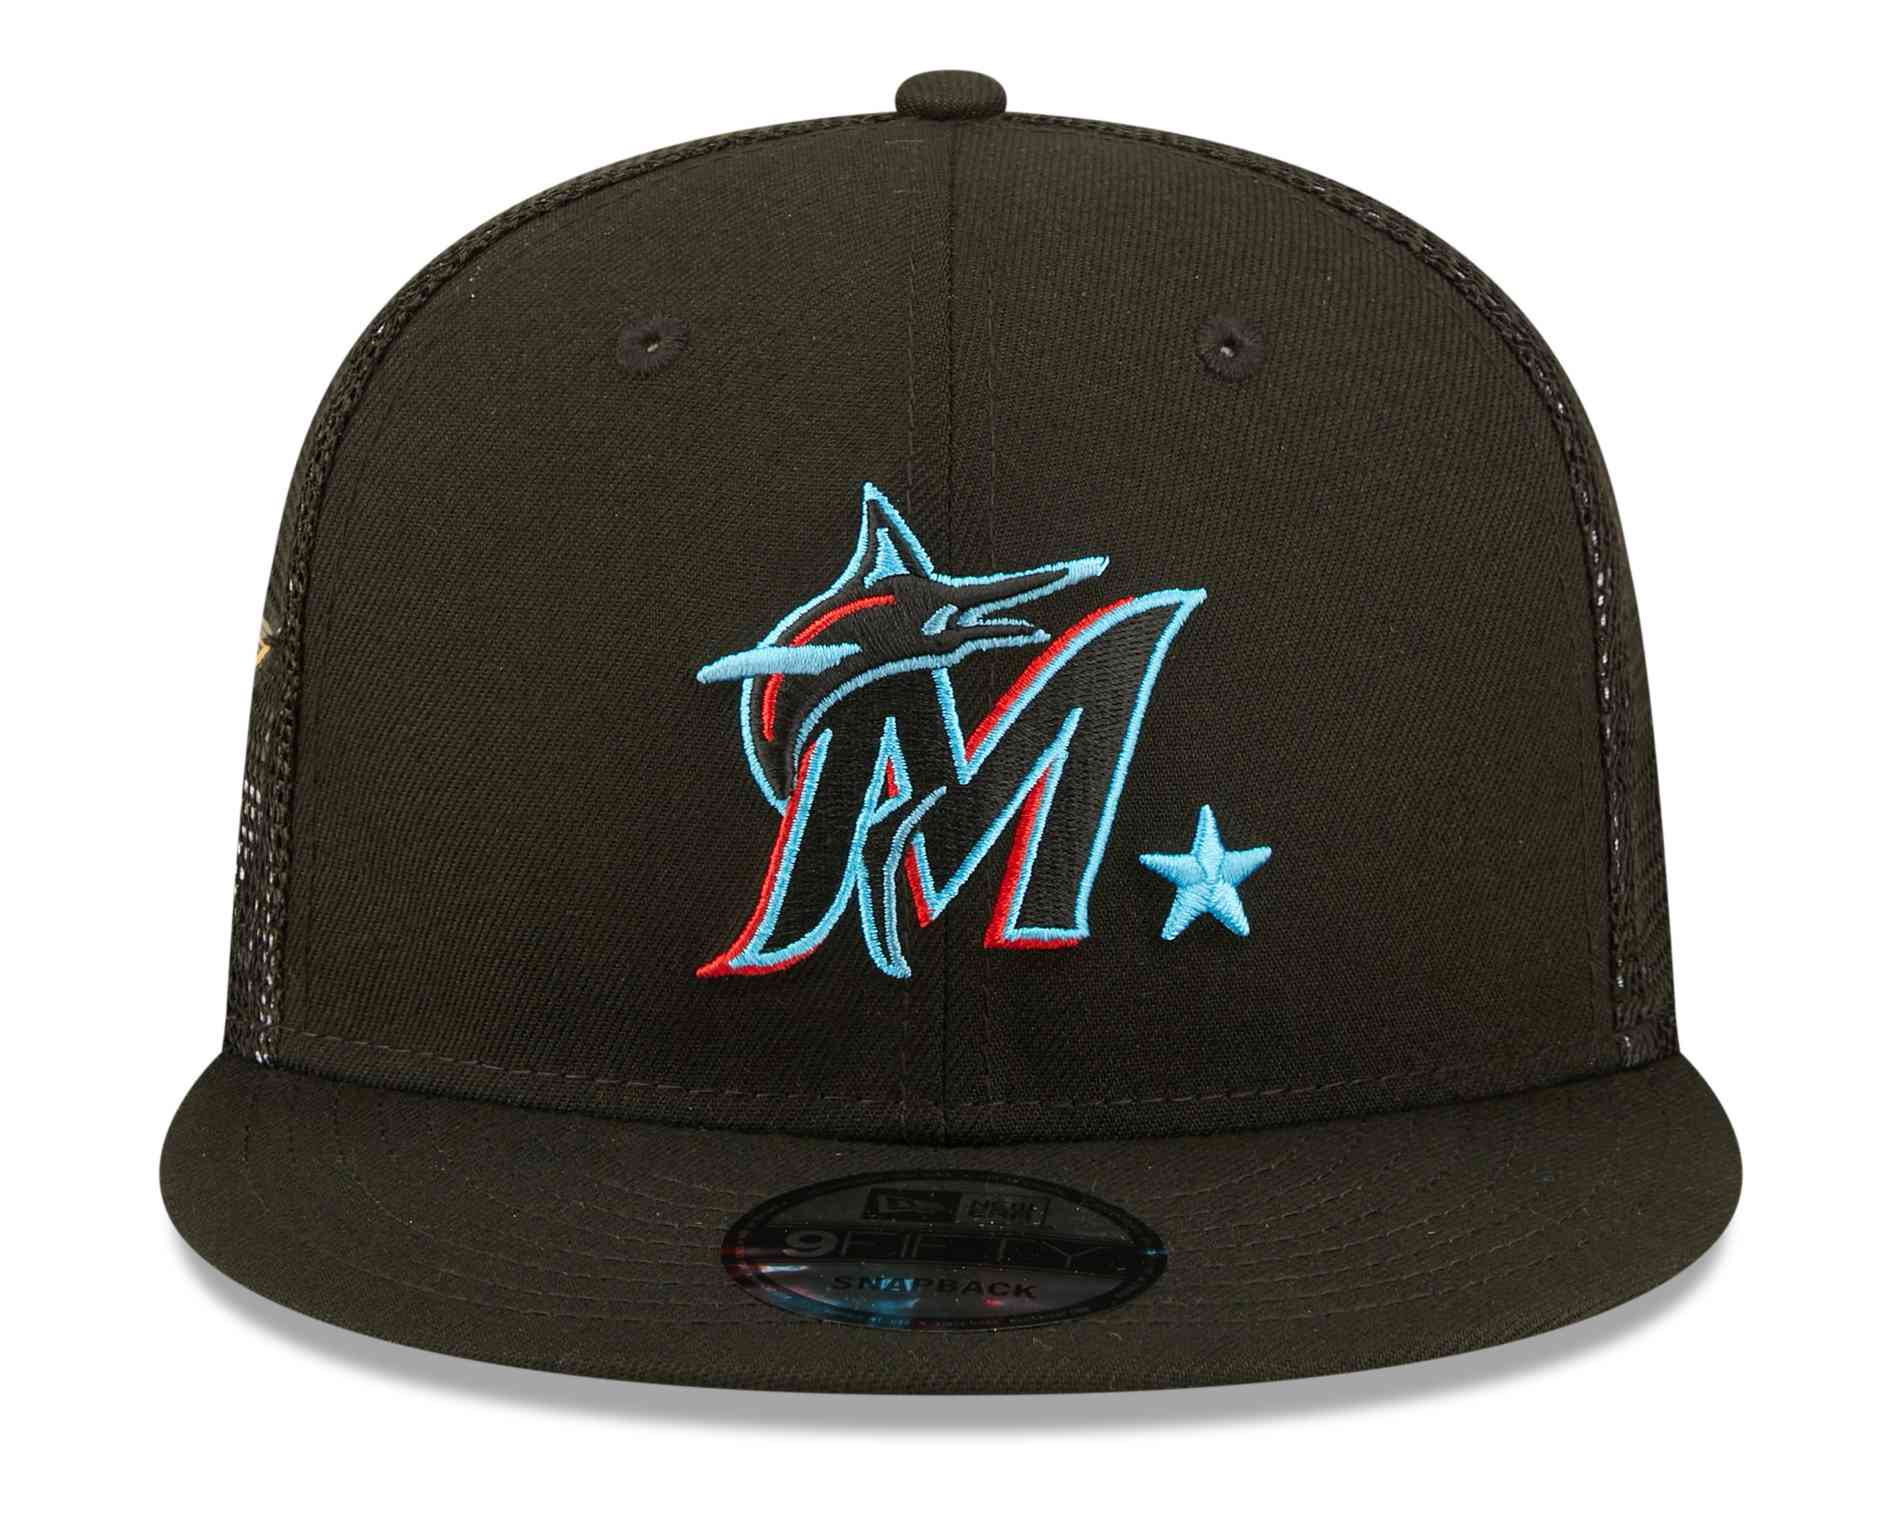 New Era - MLB Miami Marlins All Star Game Patch 9Fifty